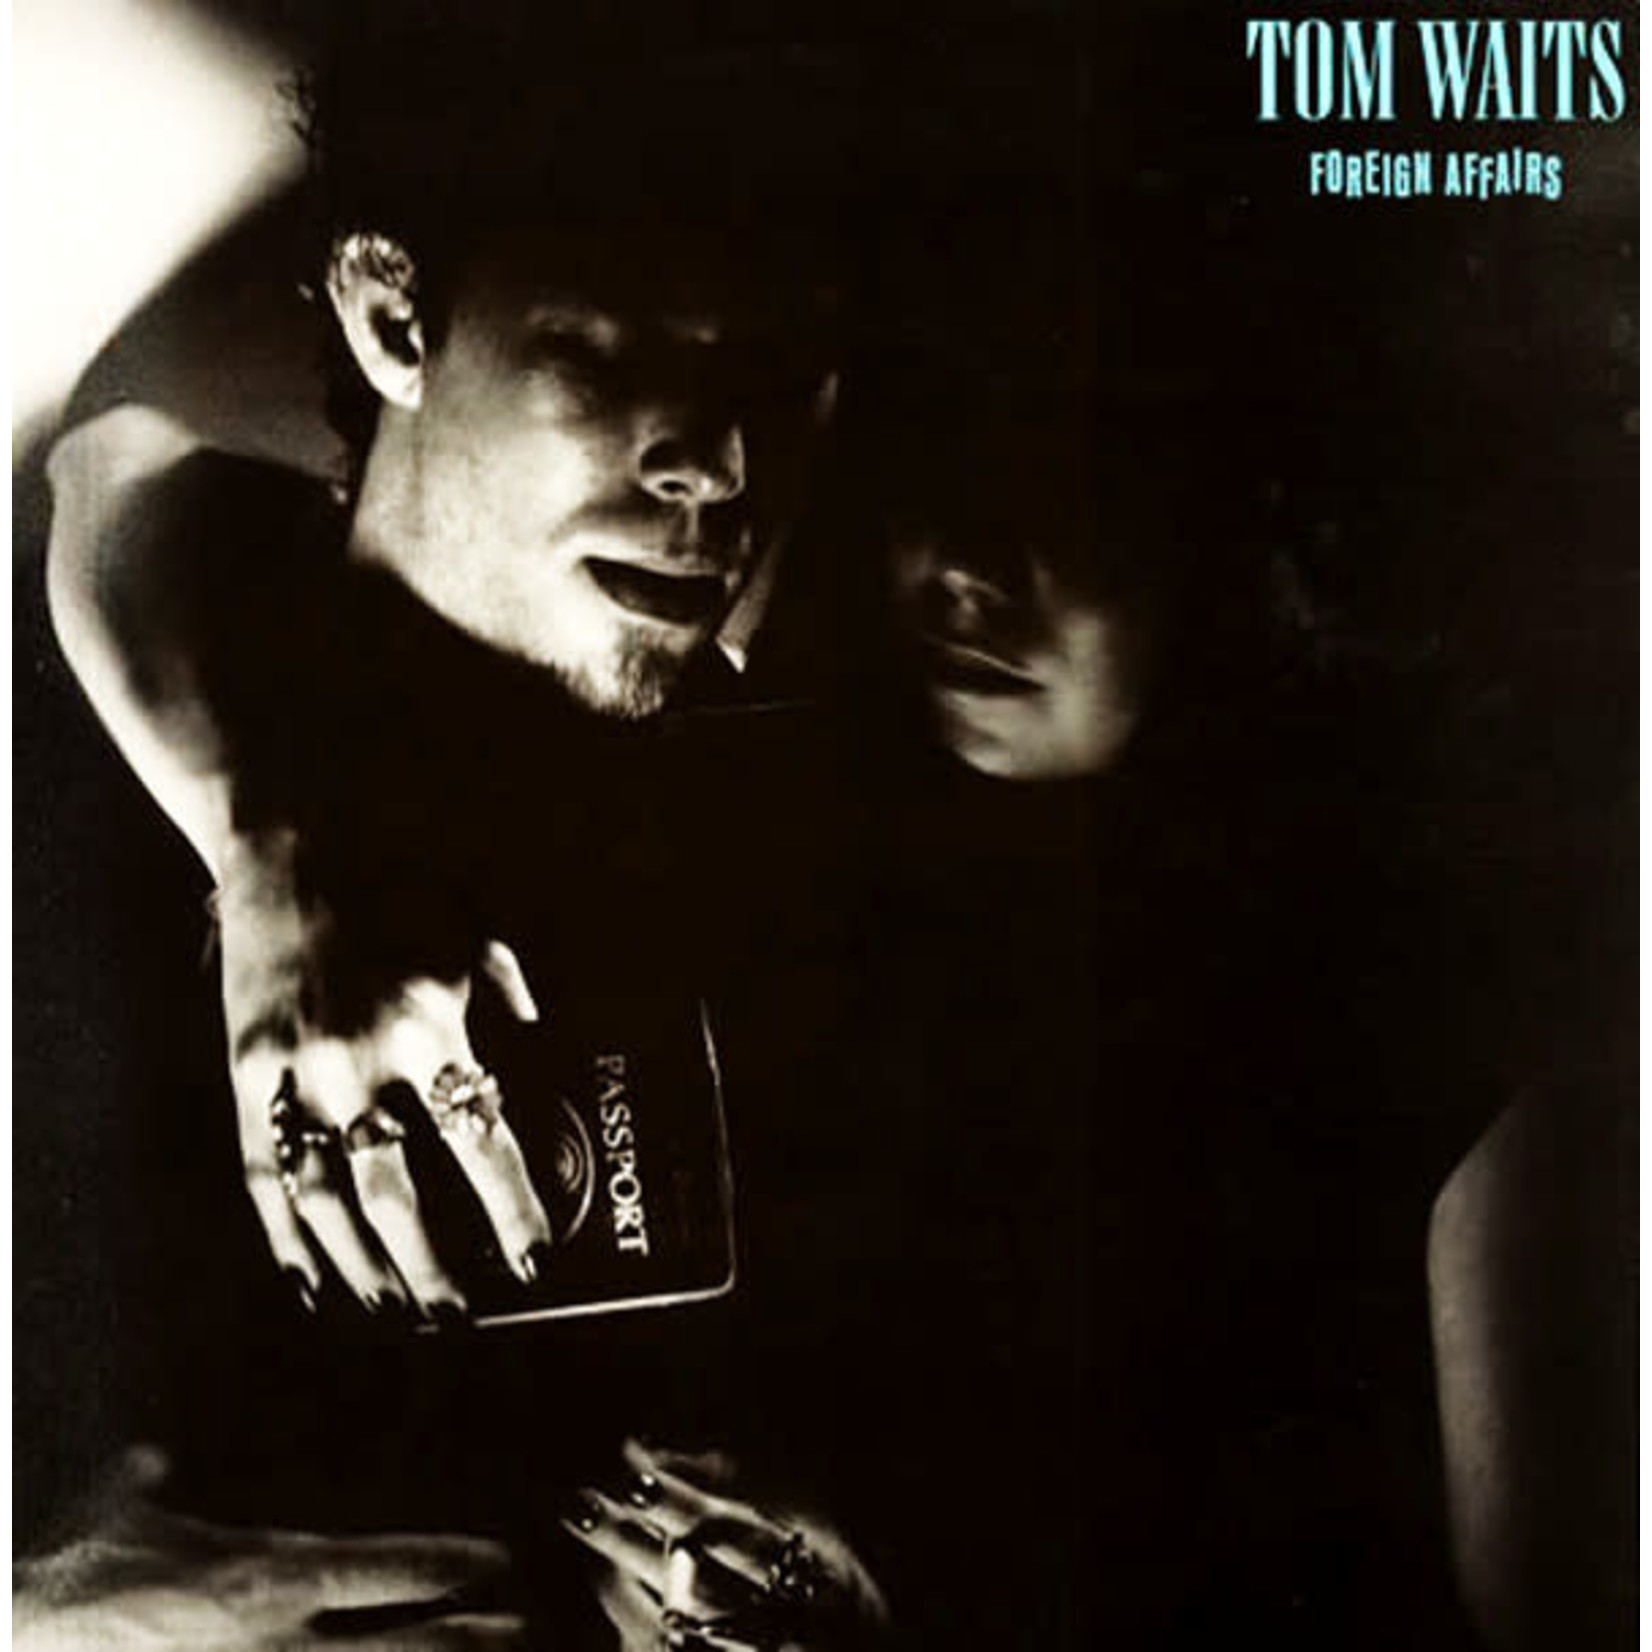 [New] Tom Waits - Foreign Affairs (indie exclusive, 2018 remaster, colour vinyl)